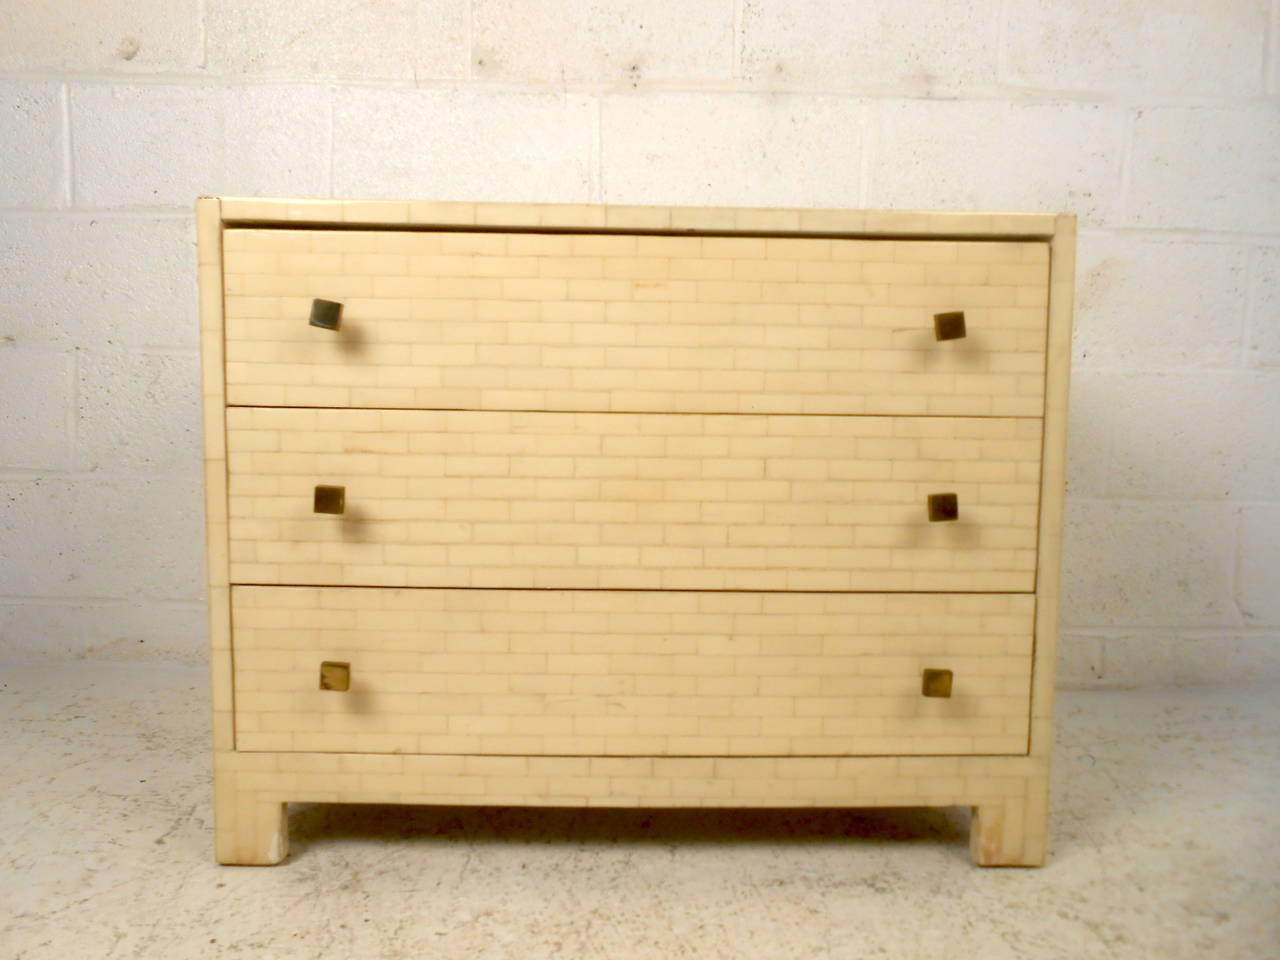 This mid century three drawer dresser features a white lacquer finish, unique brass pulls, and sturdy construction which offer a modern flare and ample storage to any home or office space.

Please confirm item location (NY or NJ) with dealer.